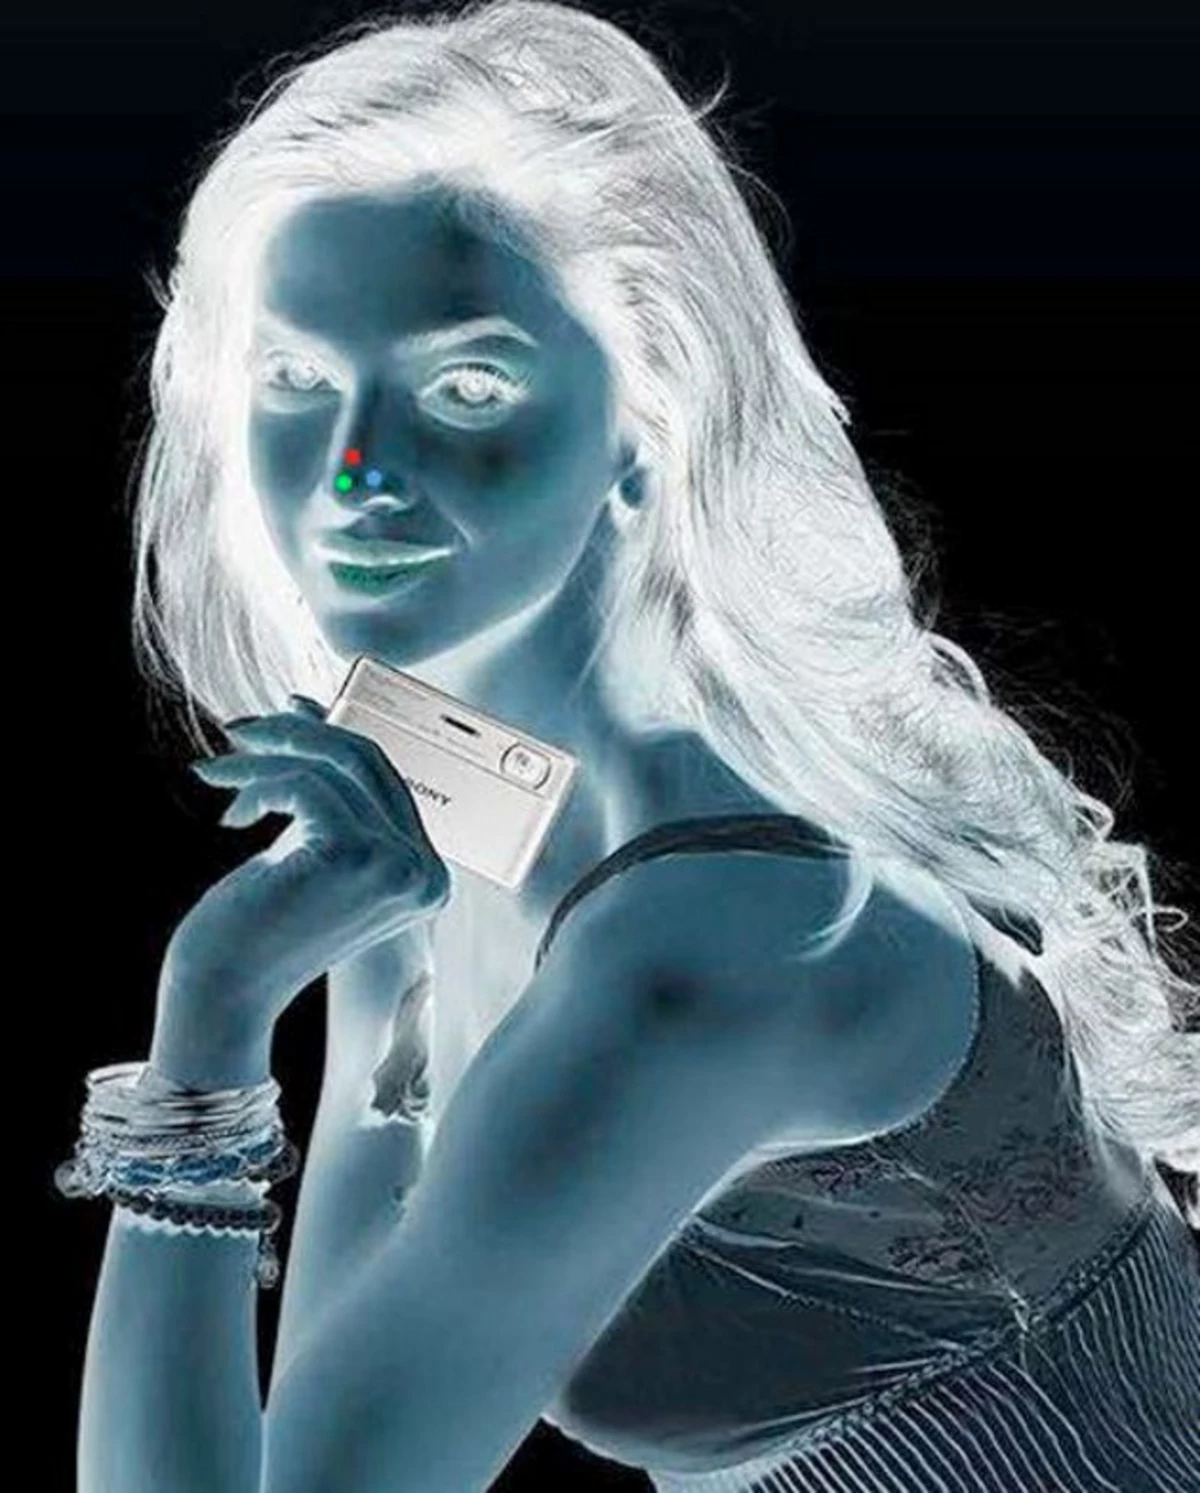 A Really Really Cool Optical Illusion [PHOTO]